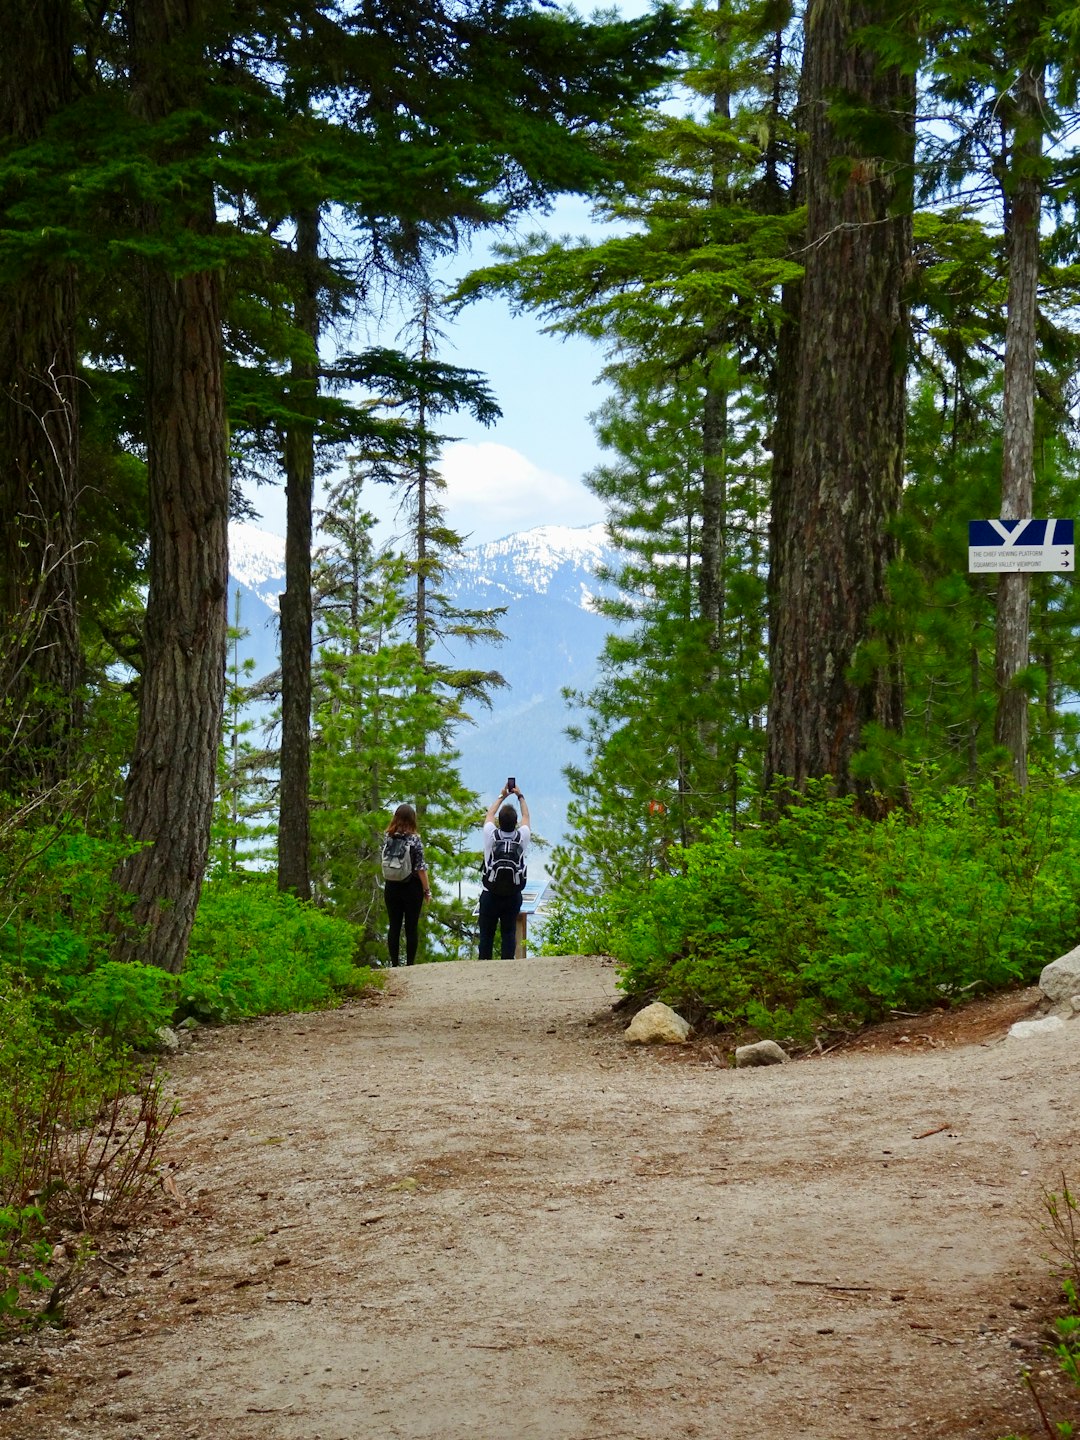 Forest photo spot Squamish-Lillooet Regional District Joffre Lakes Trail